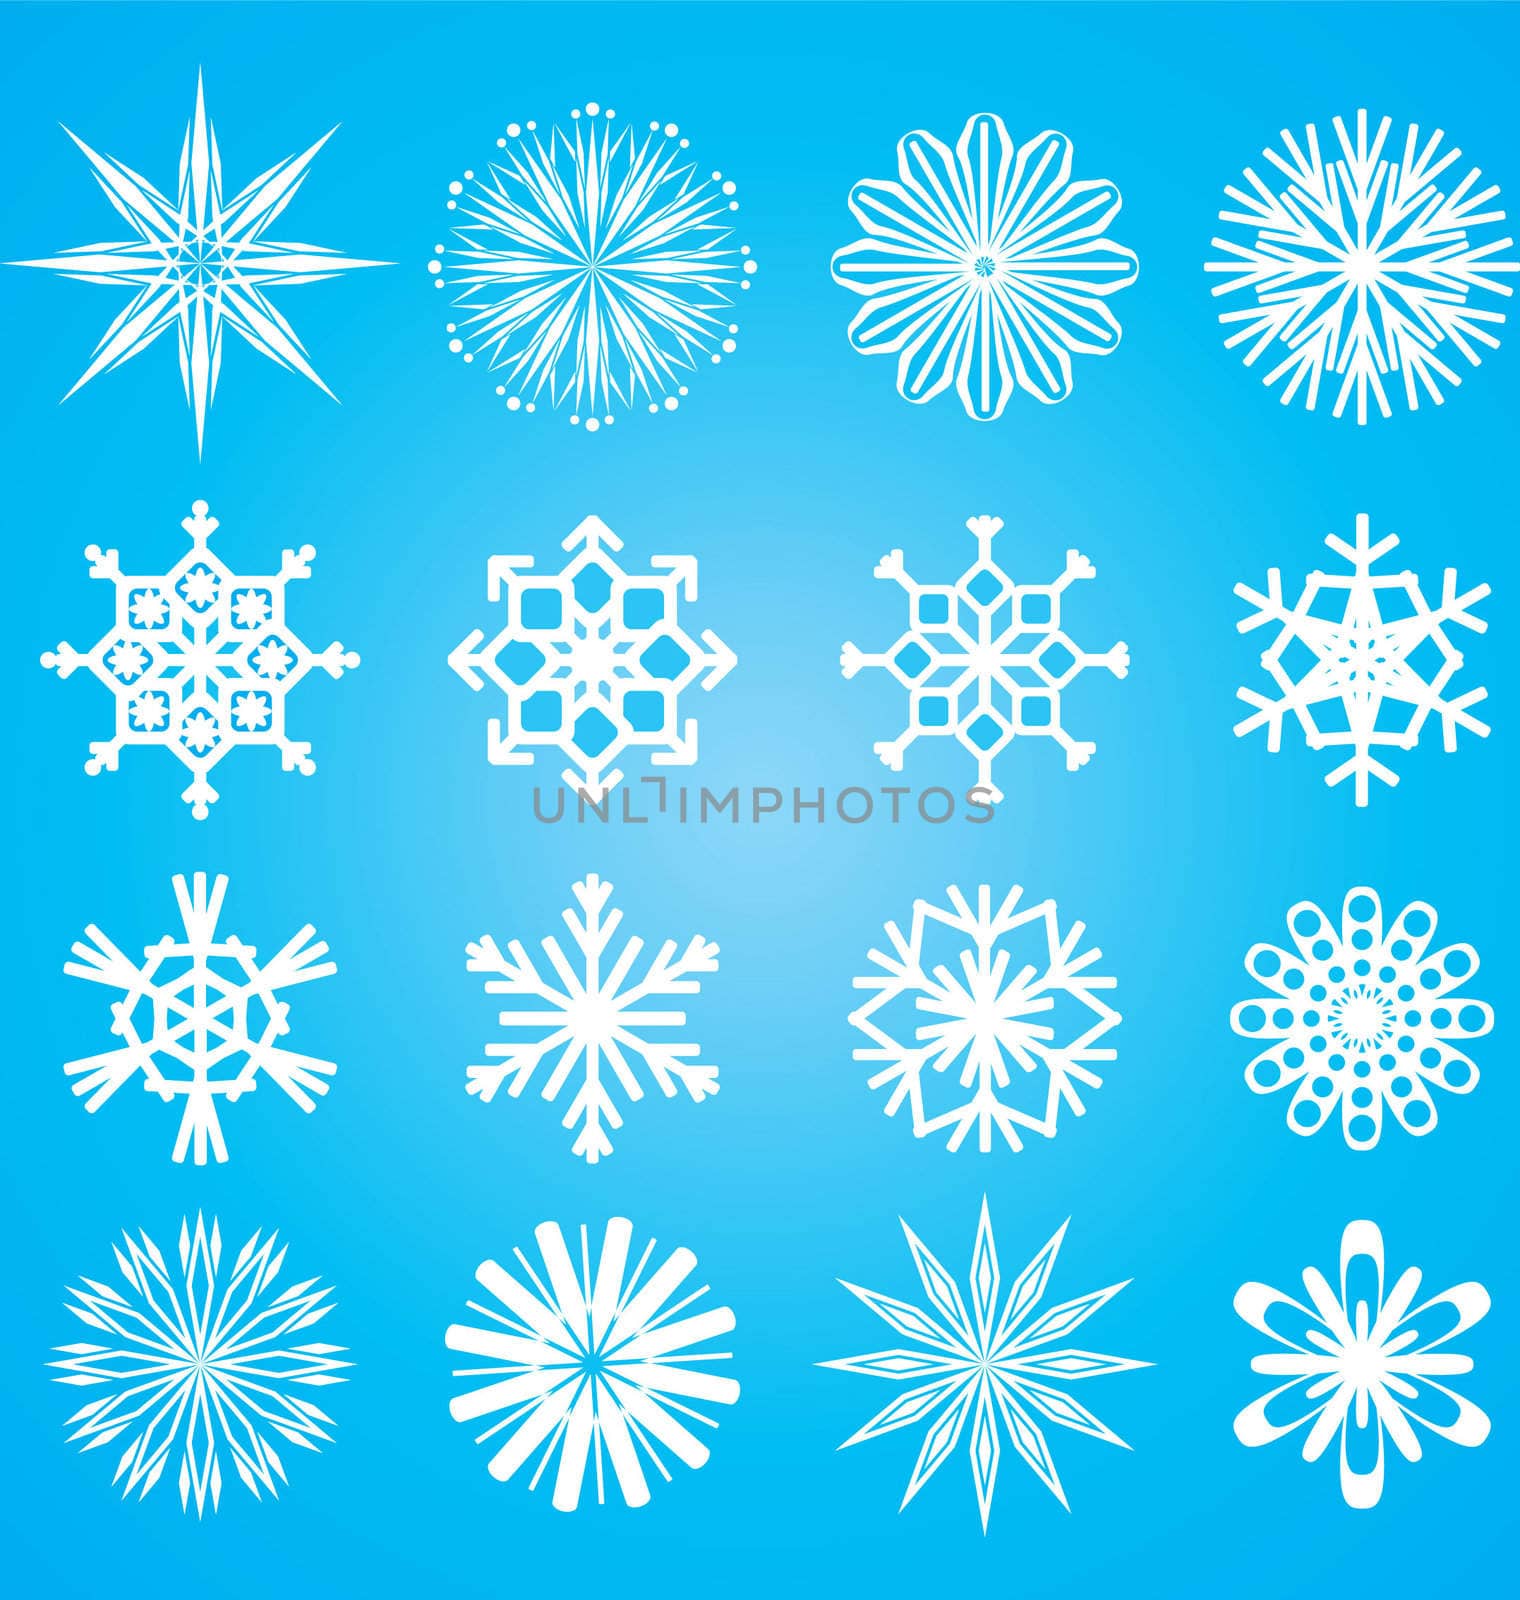 vector snowflakes set on blue background by CherJu